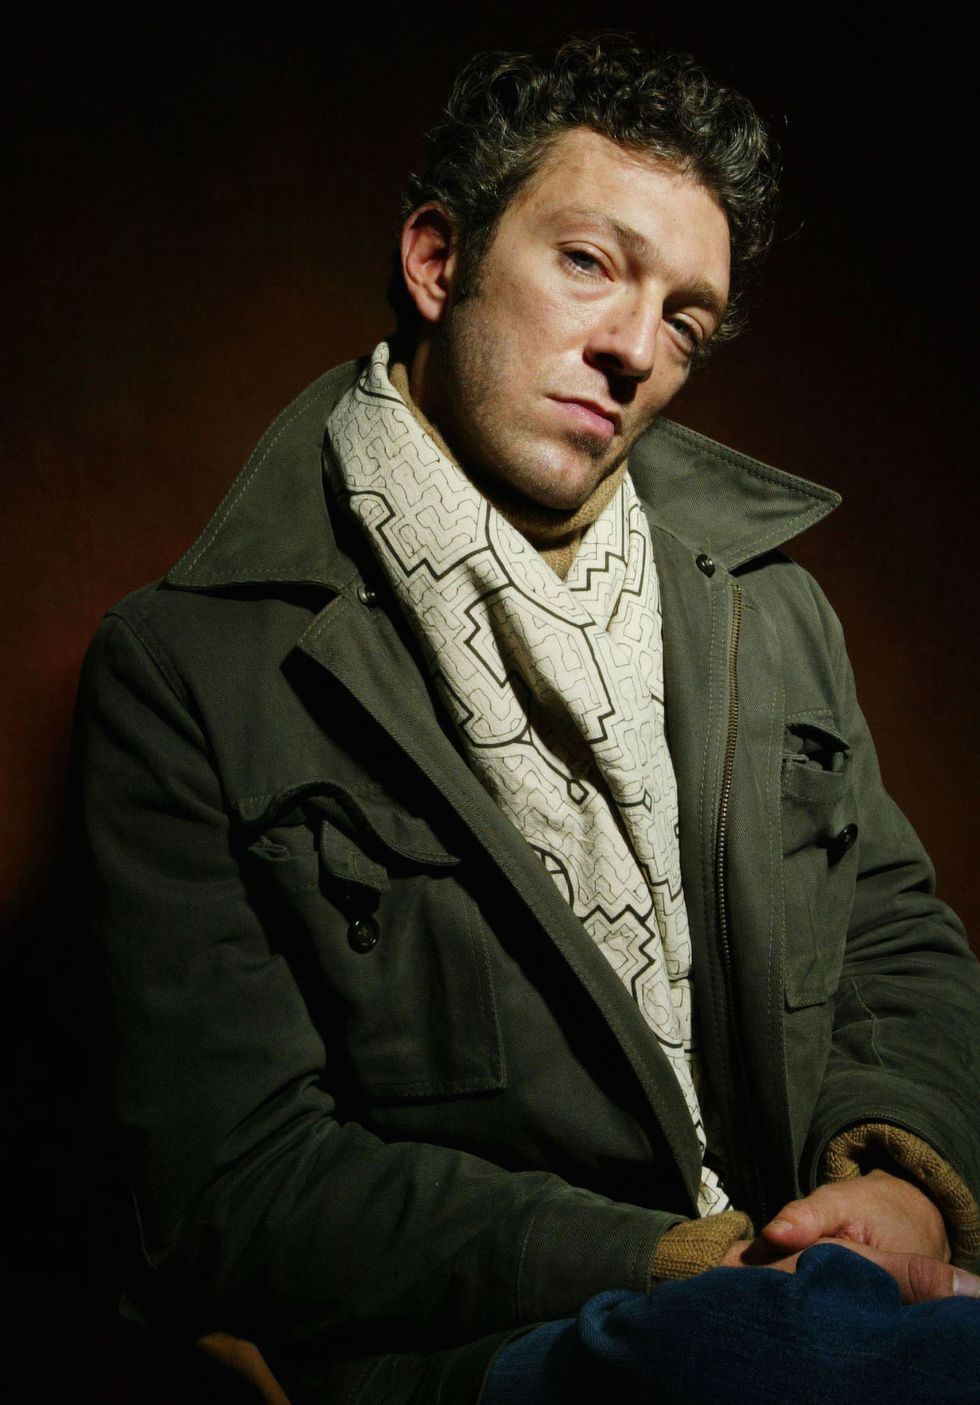 Human, Portrait, Outerwear, Photography, Acting, Jacket, 